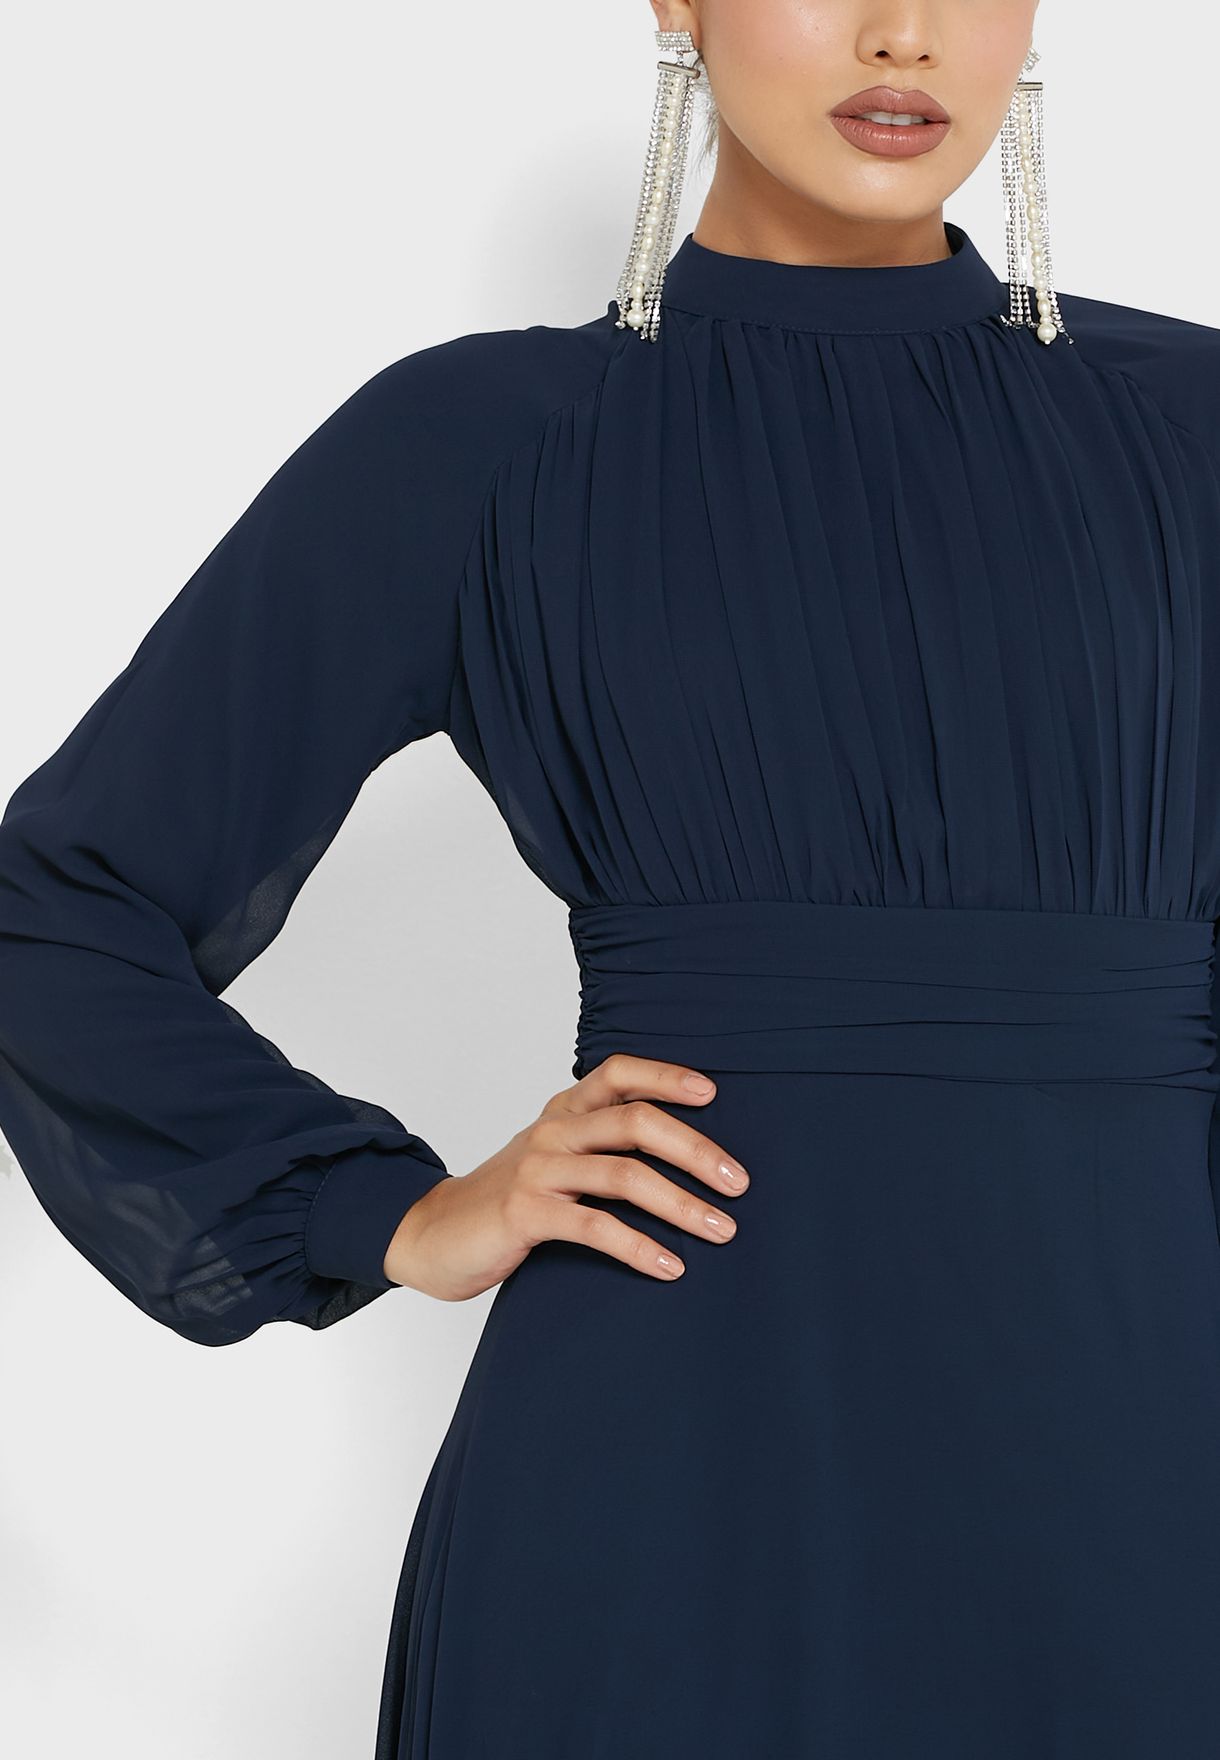 Ruched Detail Dress